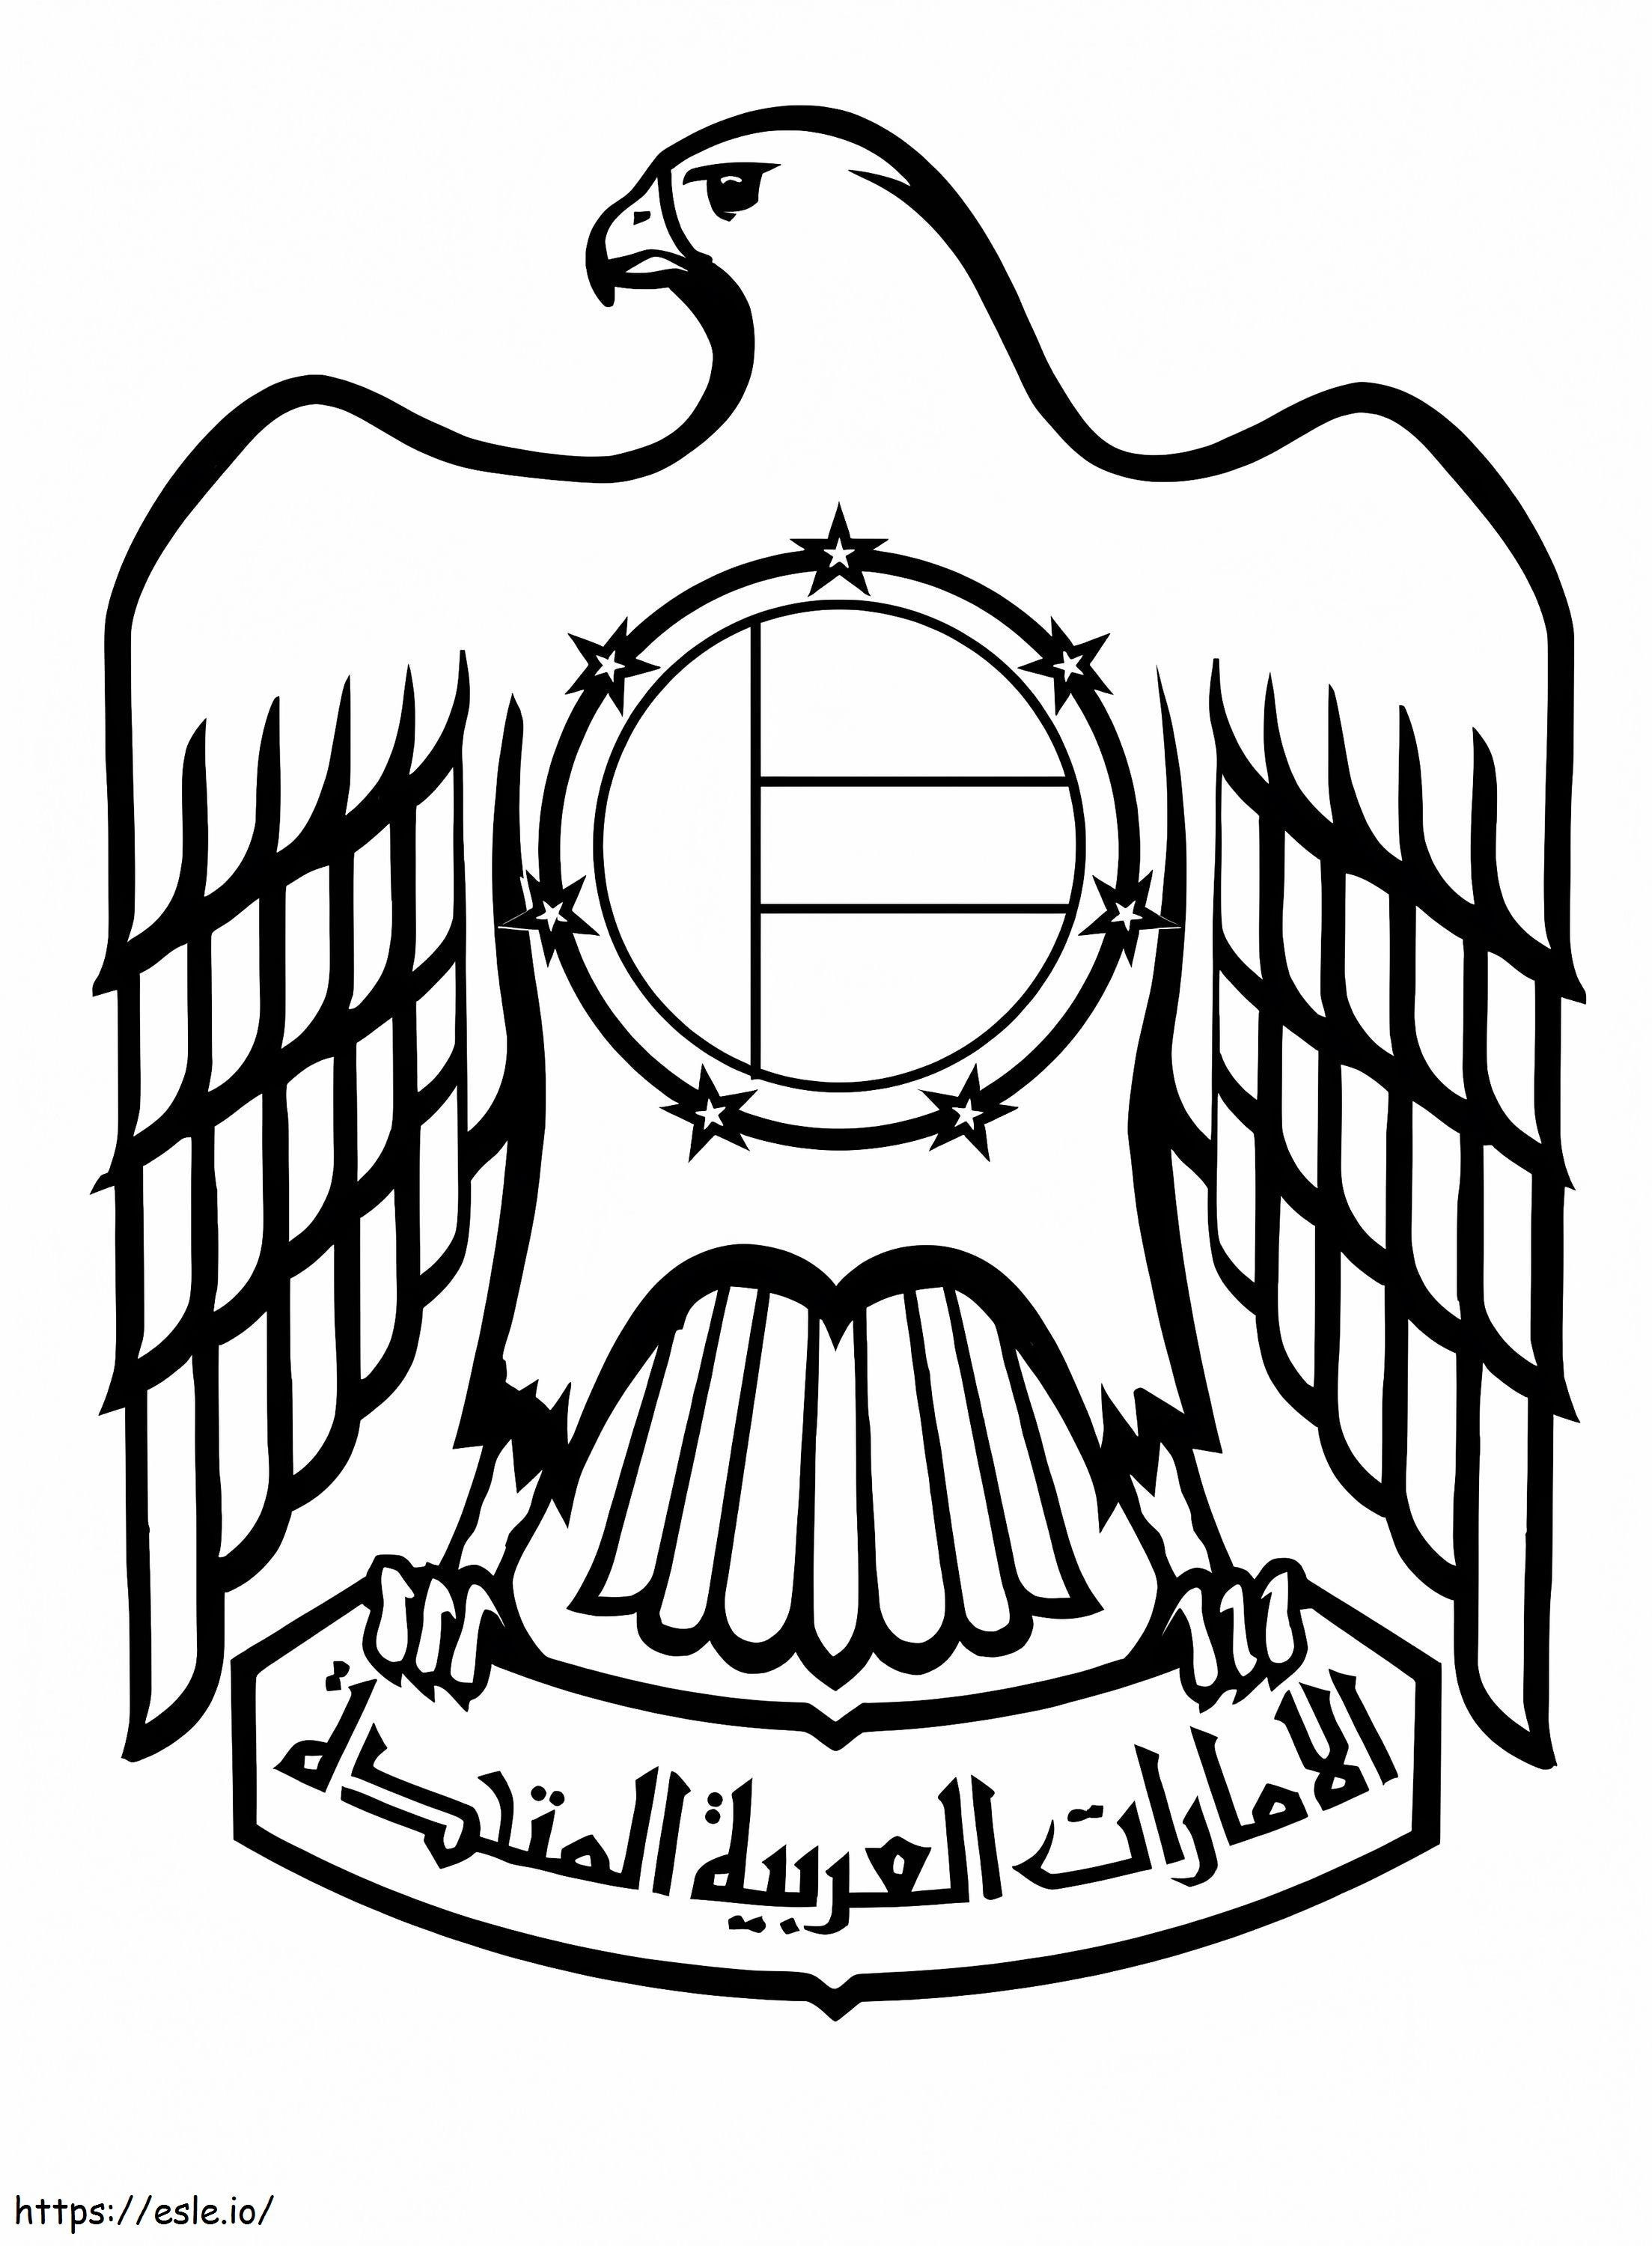 UAE Coat Of Arms coloring page